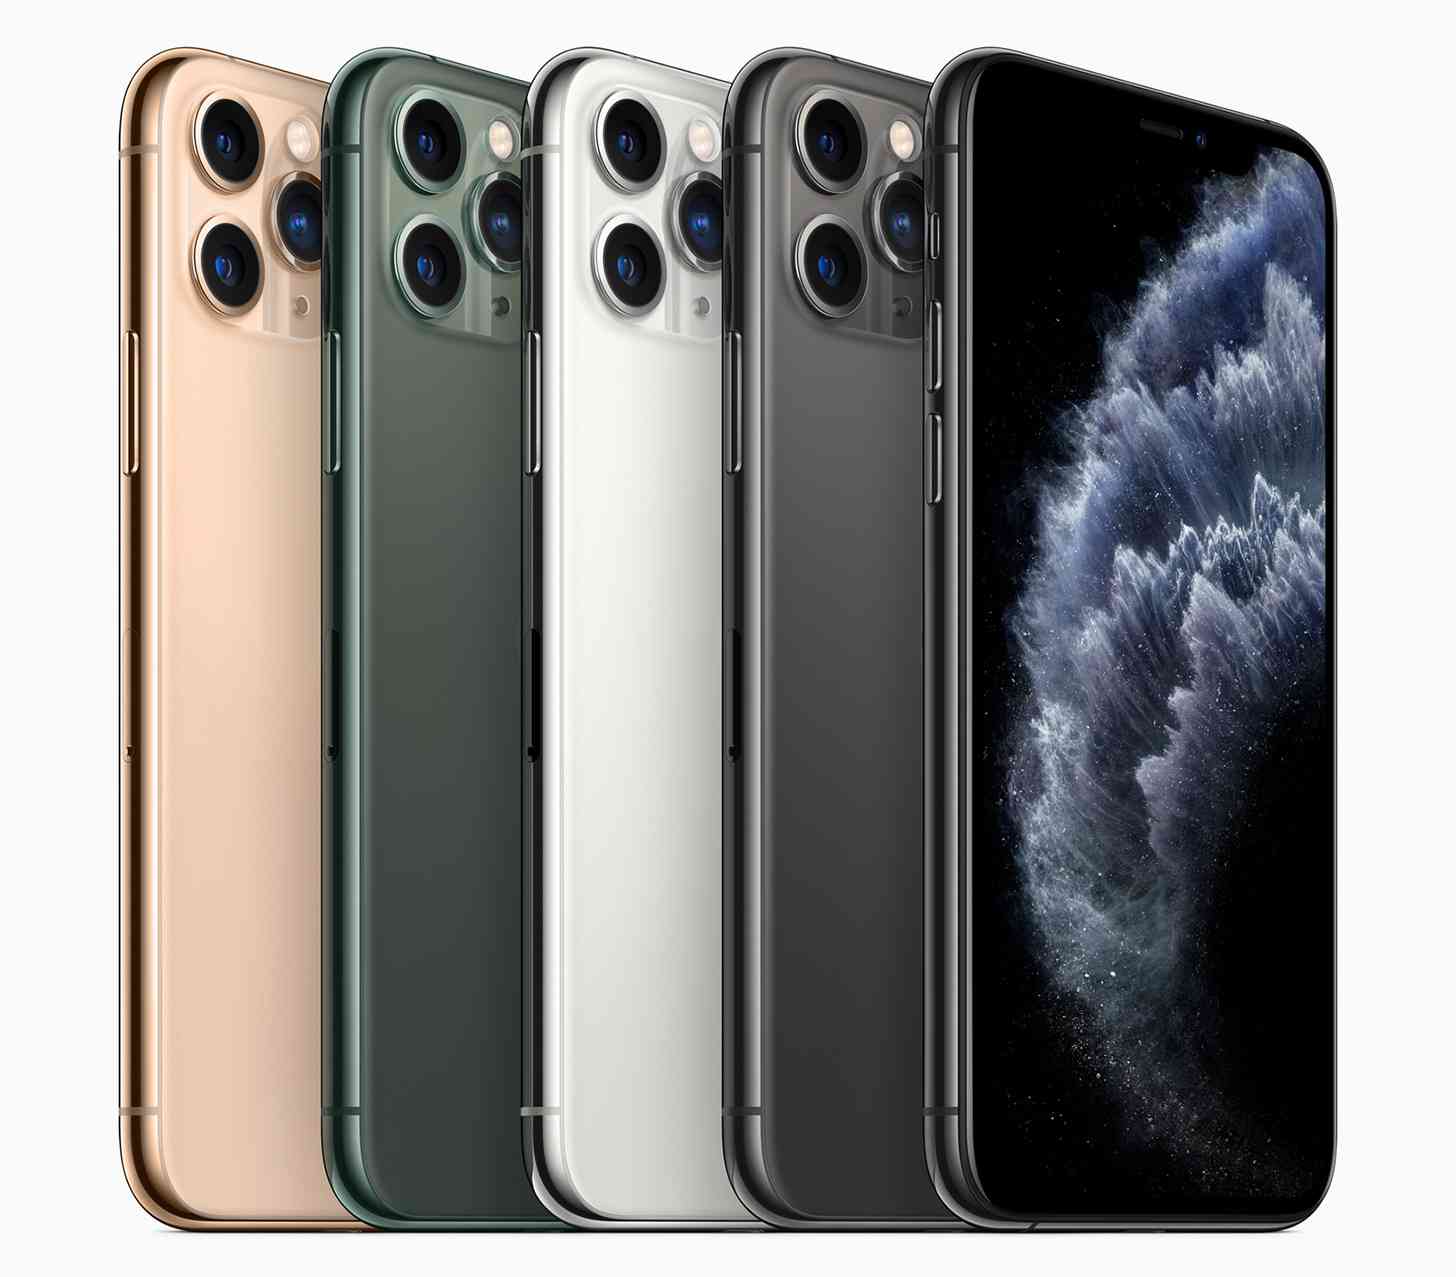 iPhone 11 Pro Max colors